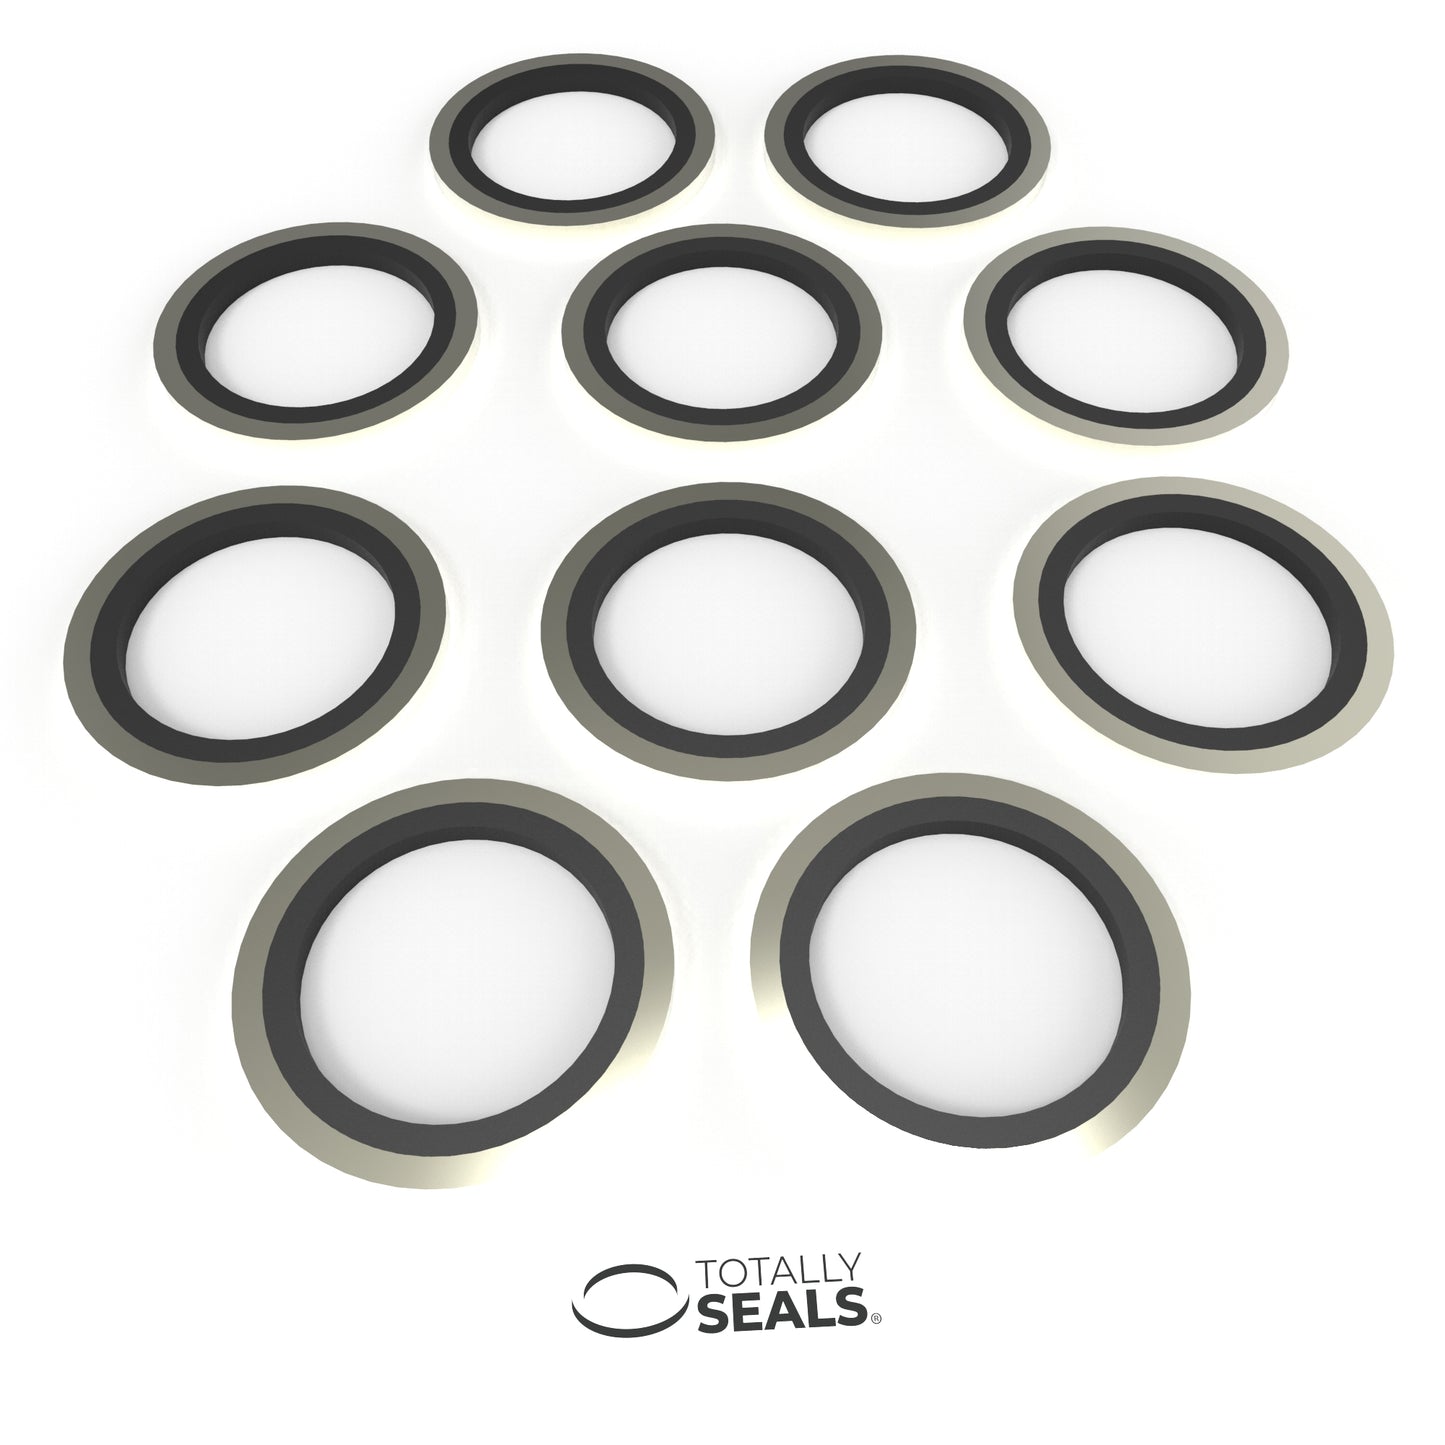 M22 Bonded Seals (Dowty Washers) - Totally Seals®